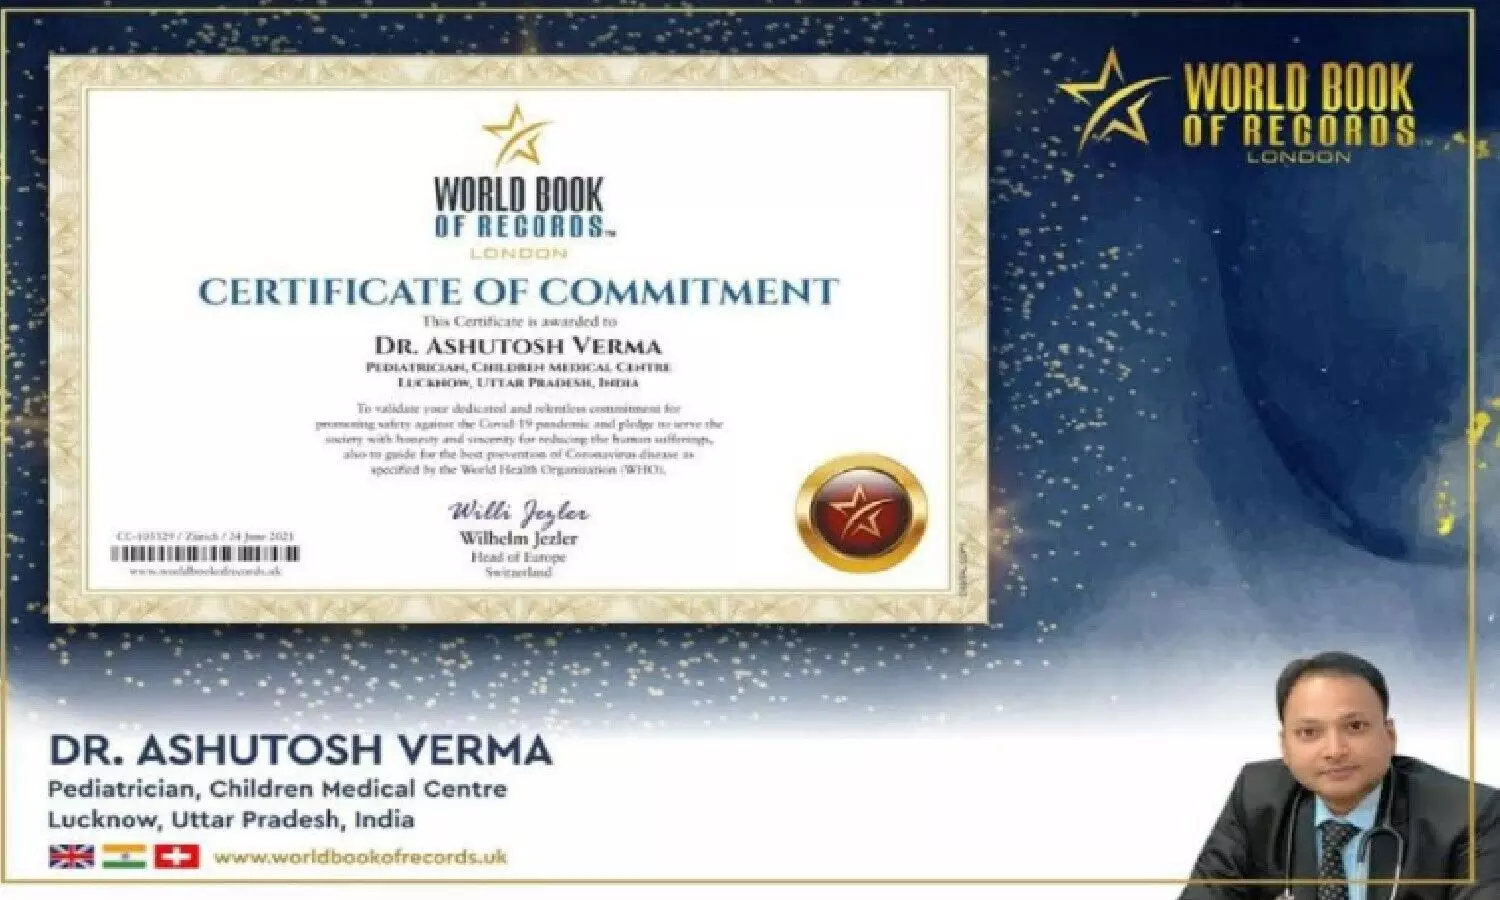 Pediatrician Dr. Ashutosh Verma has been honored by the World Book of Records, London